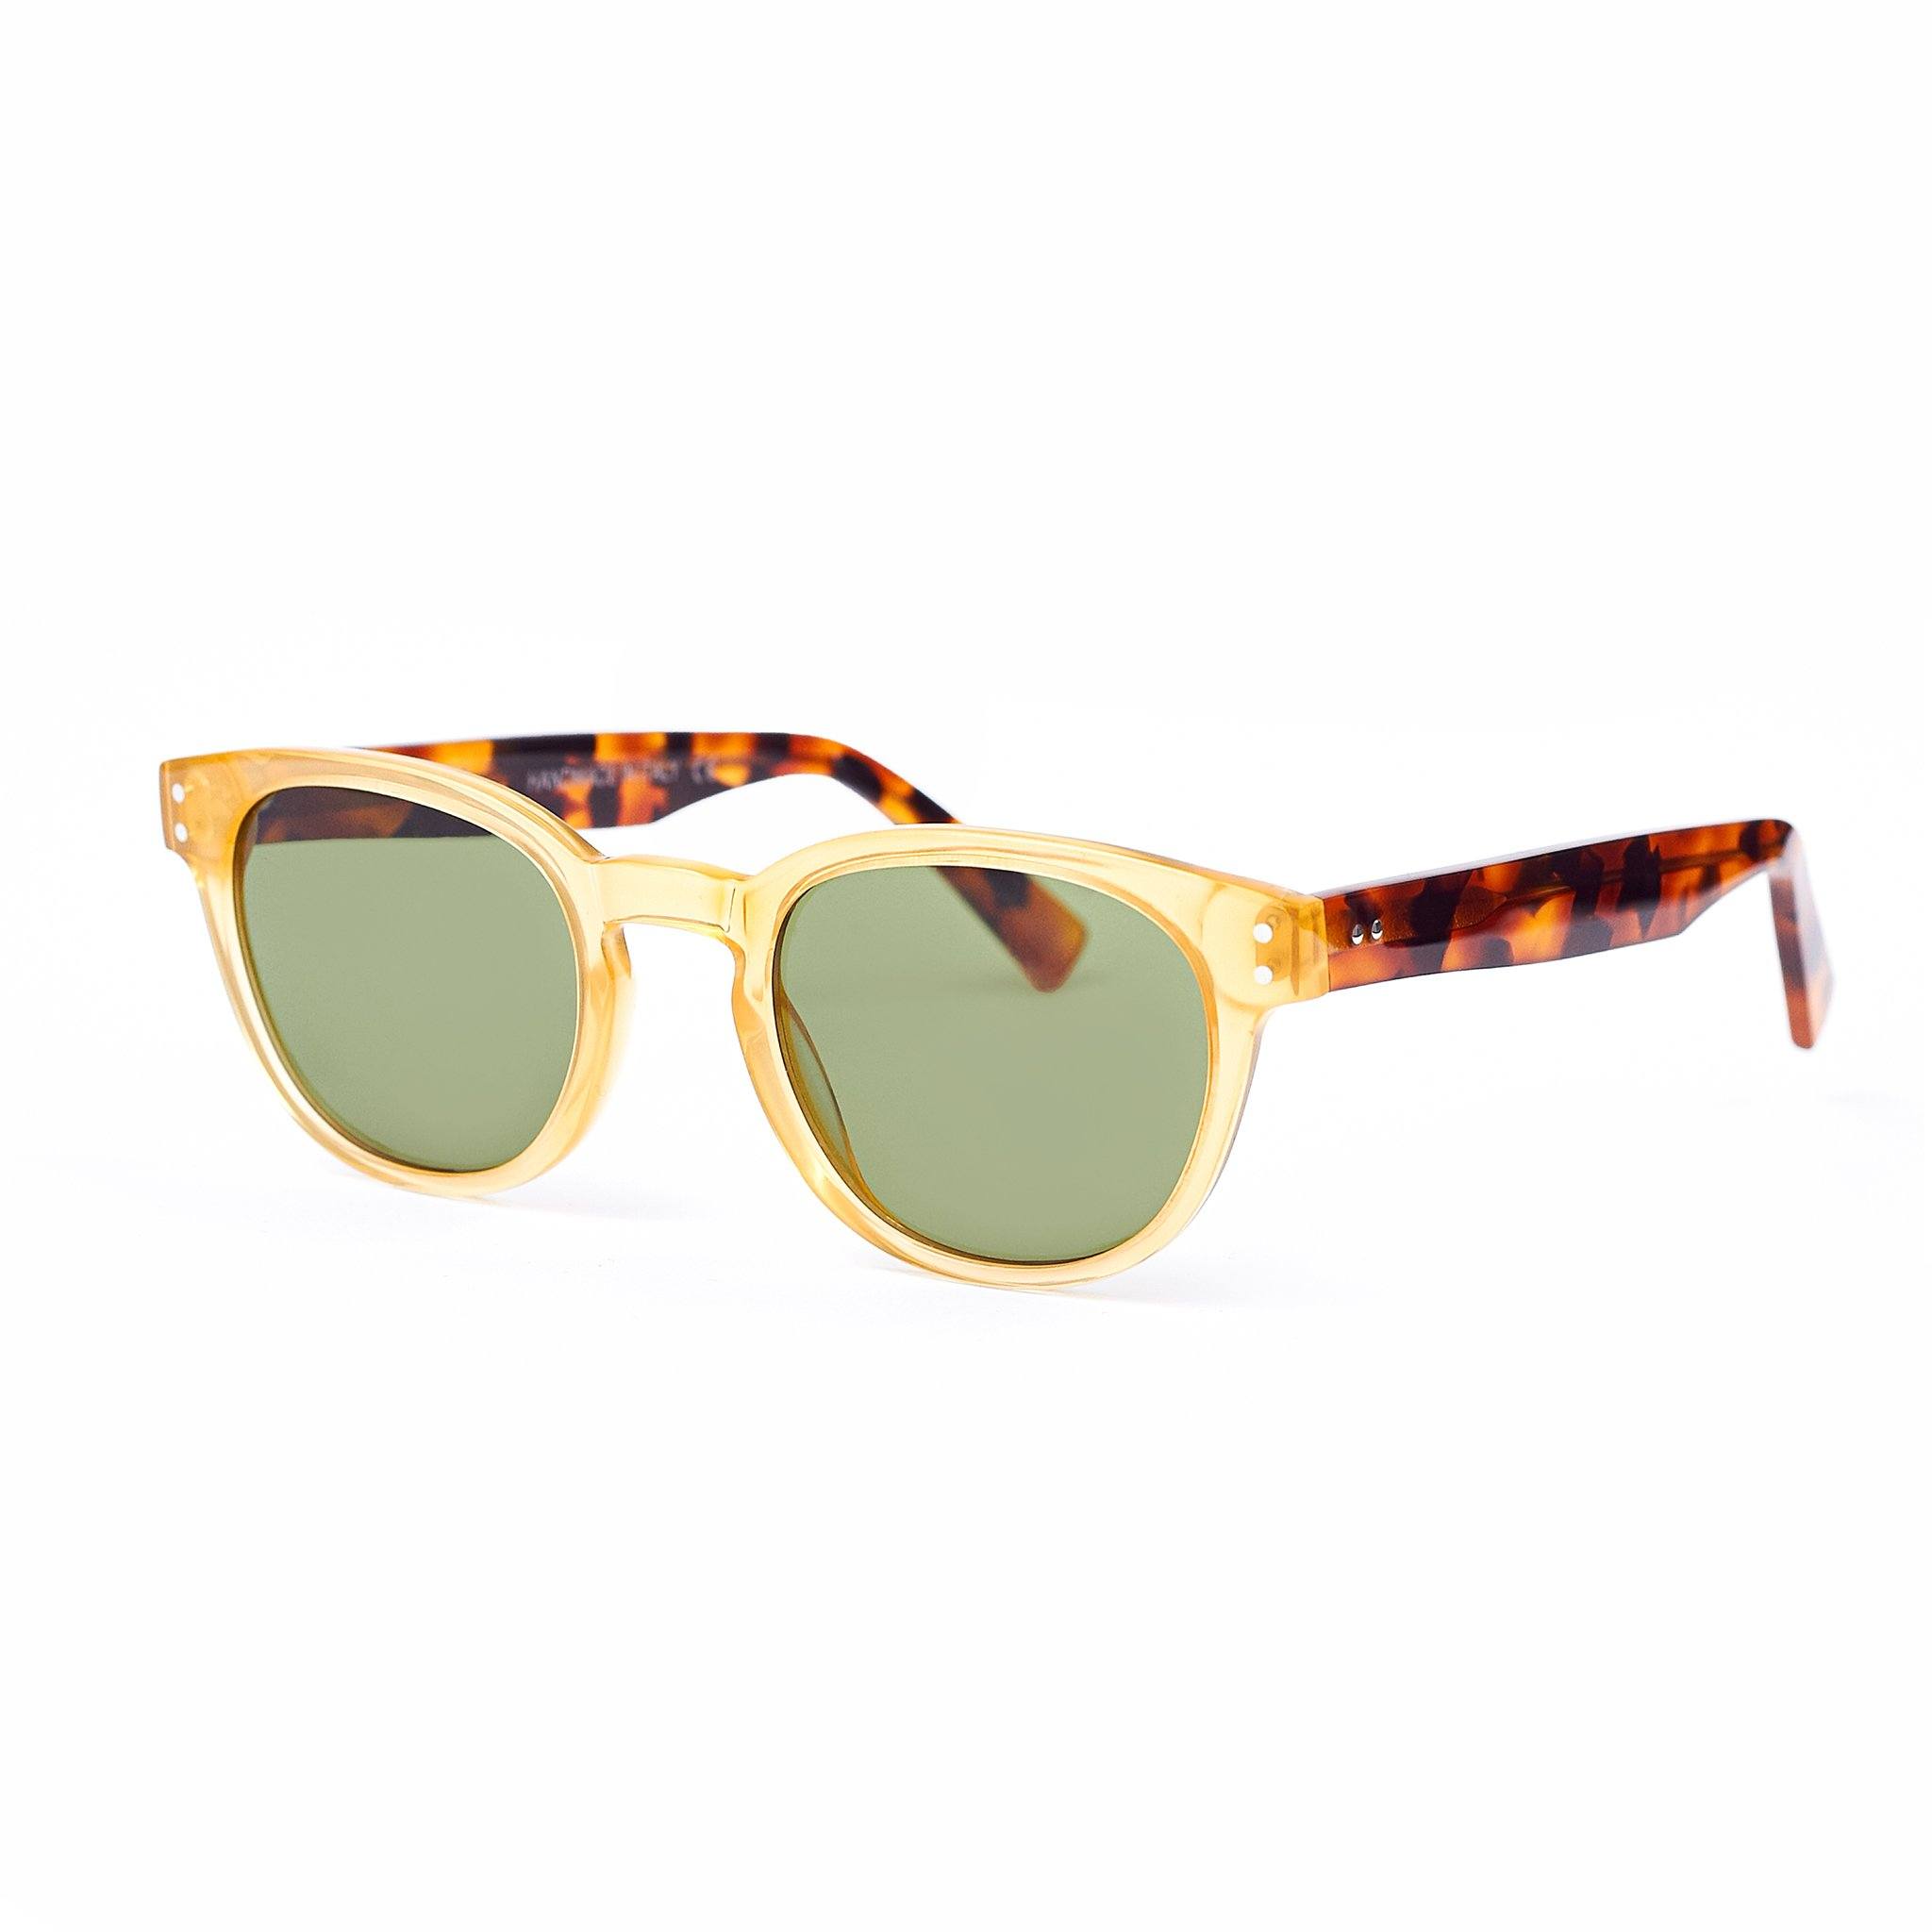 Honey and tortoise colored sunglasses with green lenses handmade in italy